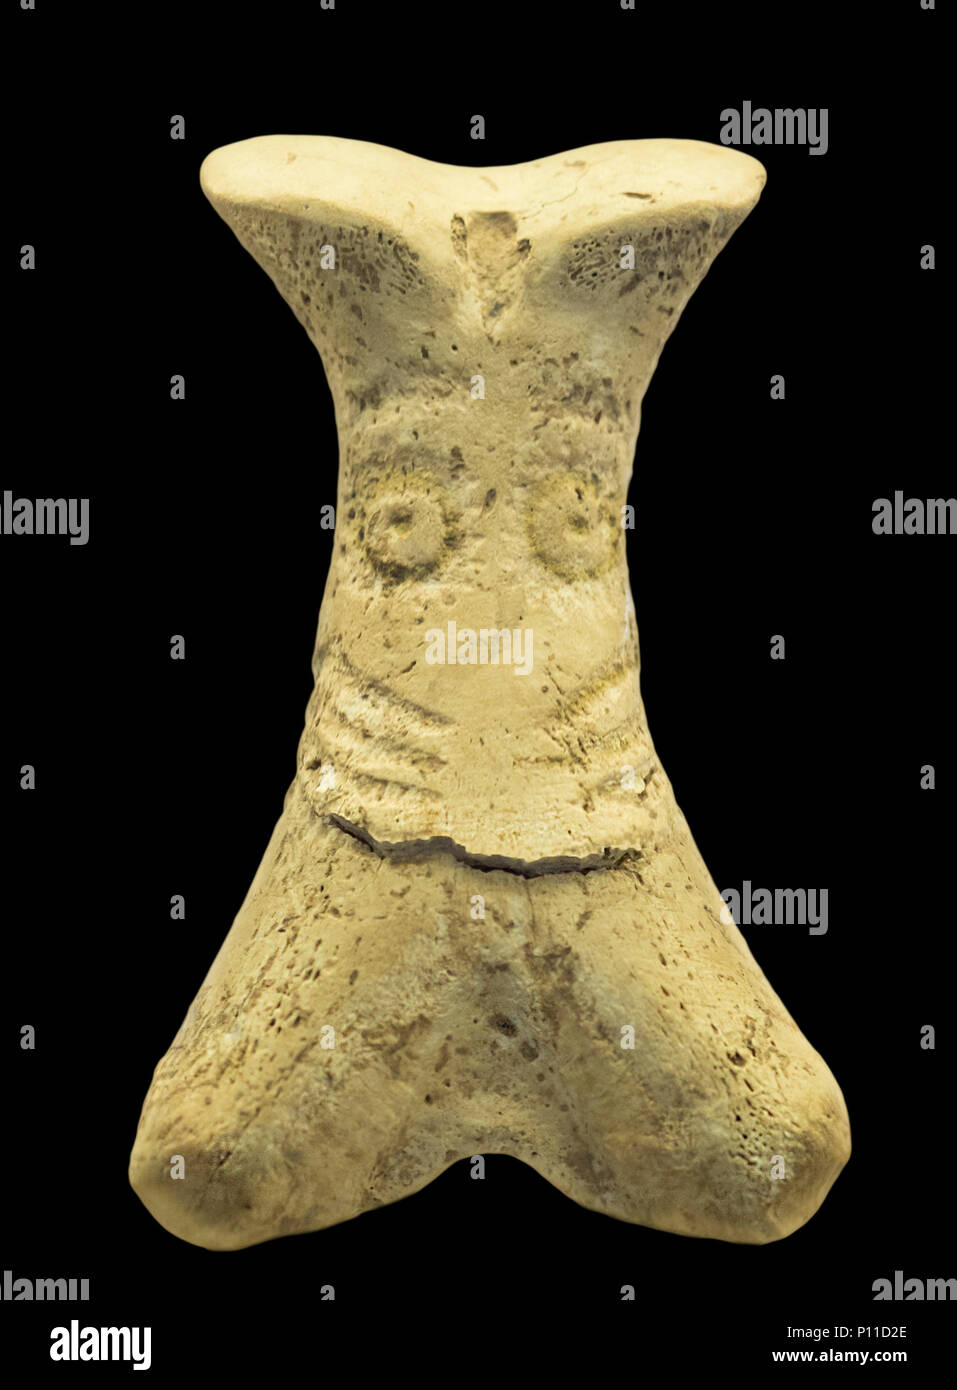 Phalanx bone idol with face depicted. Front view. Isolated over black Stock Photo